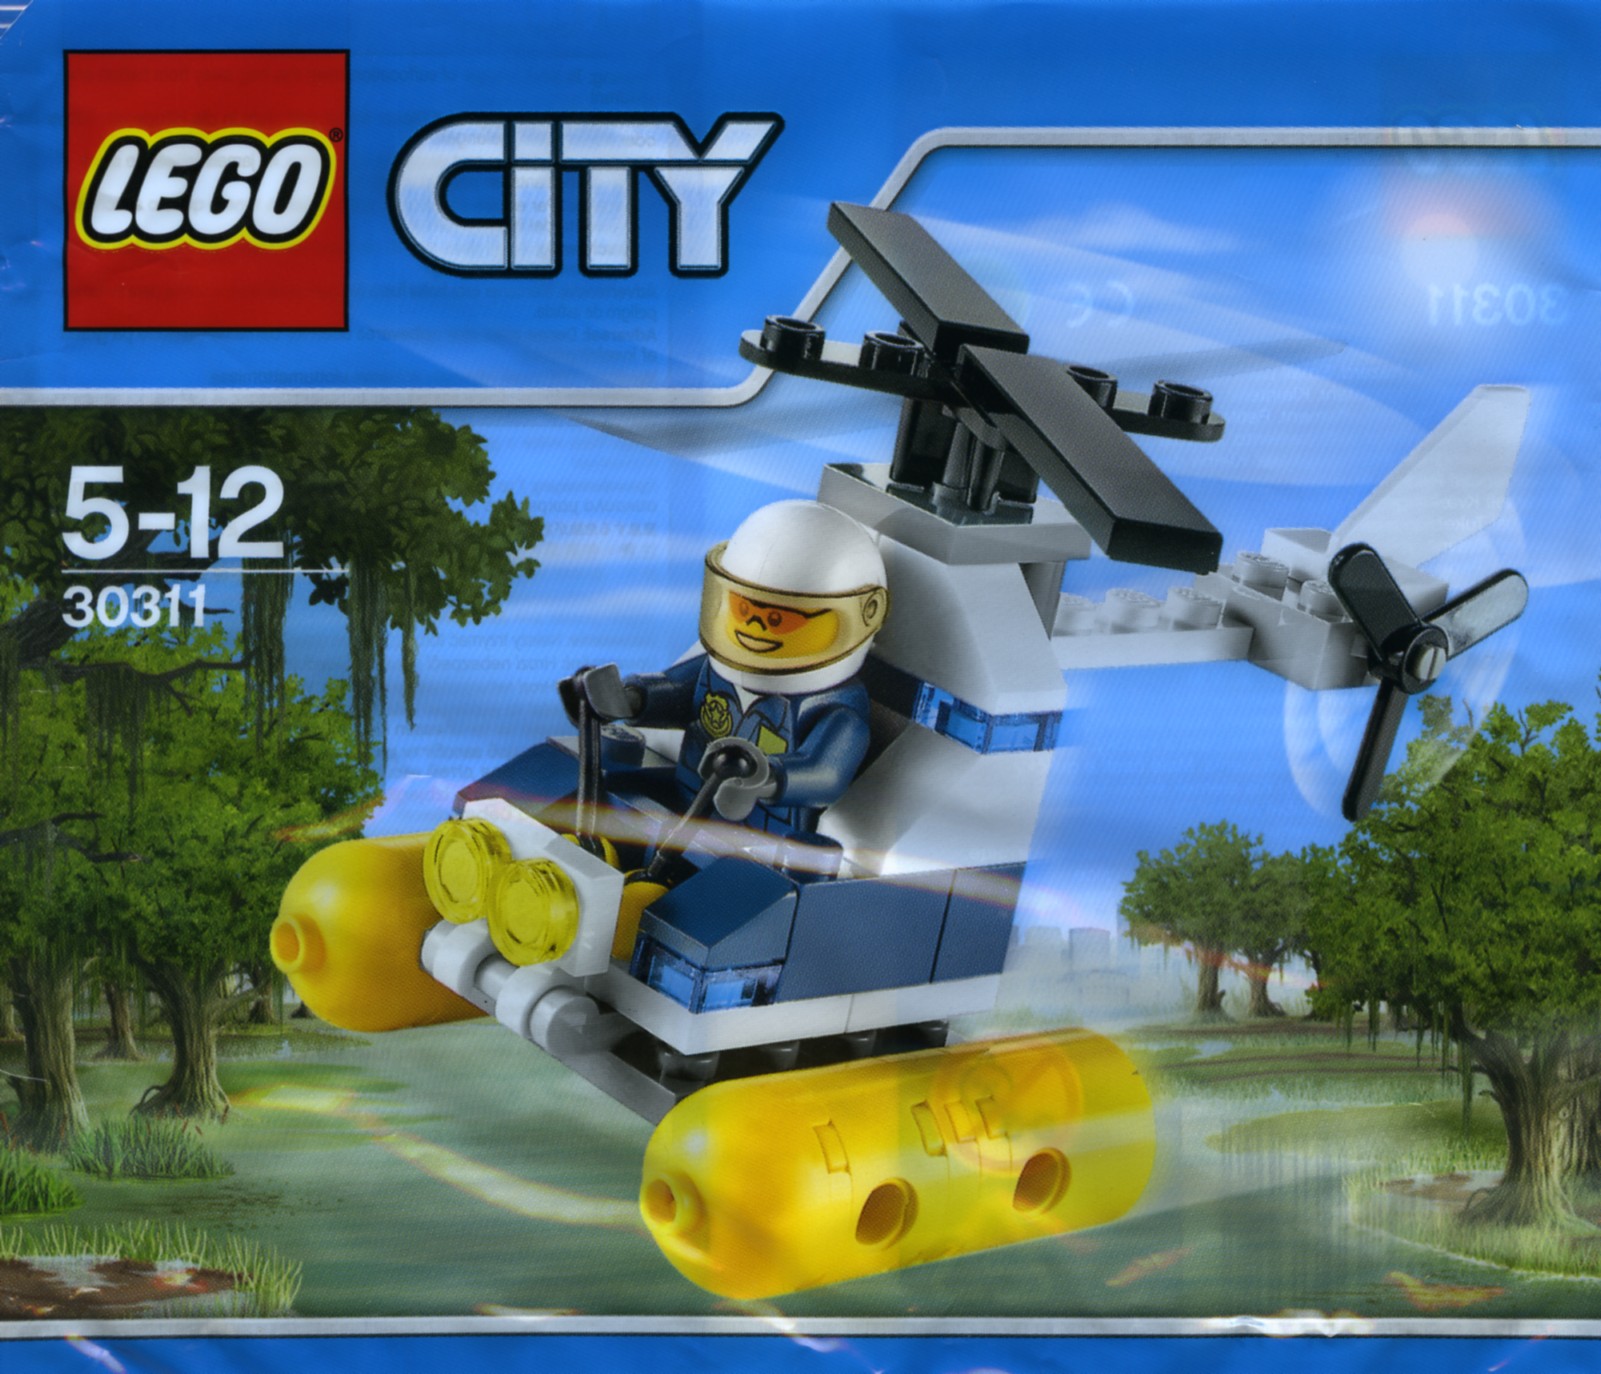 Swamp Police Minifigures Lego Police Crook Male 60068 60071 cty0513 